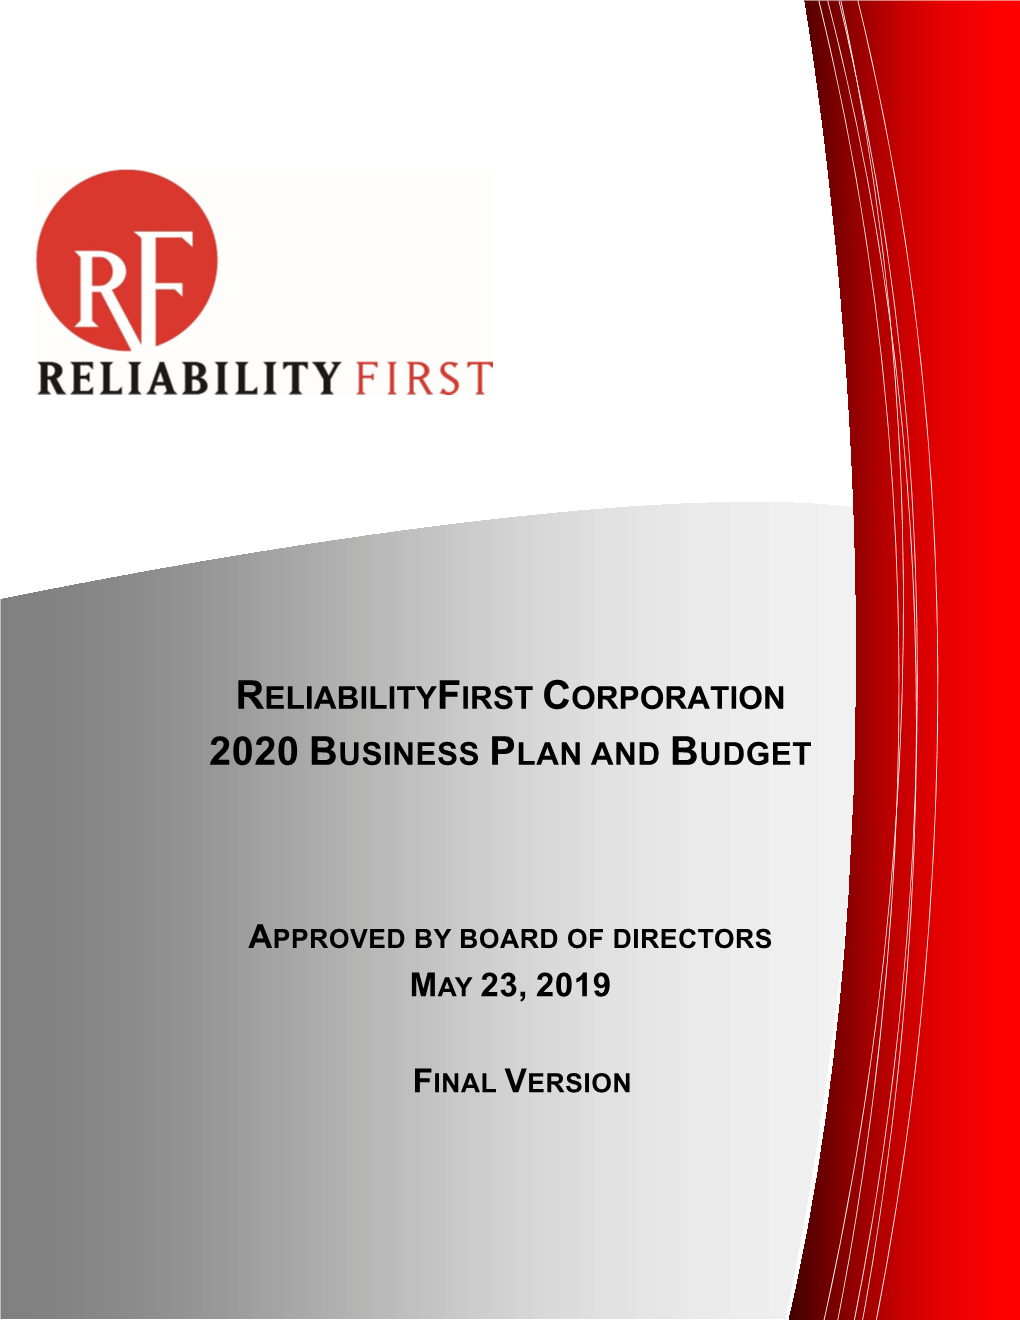 Reliabilityfirst Corporation 2020 Business Plan and Budget